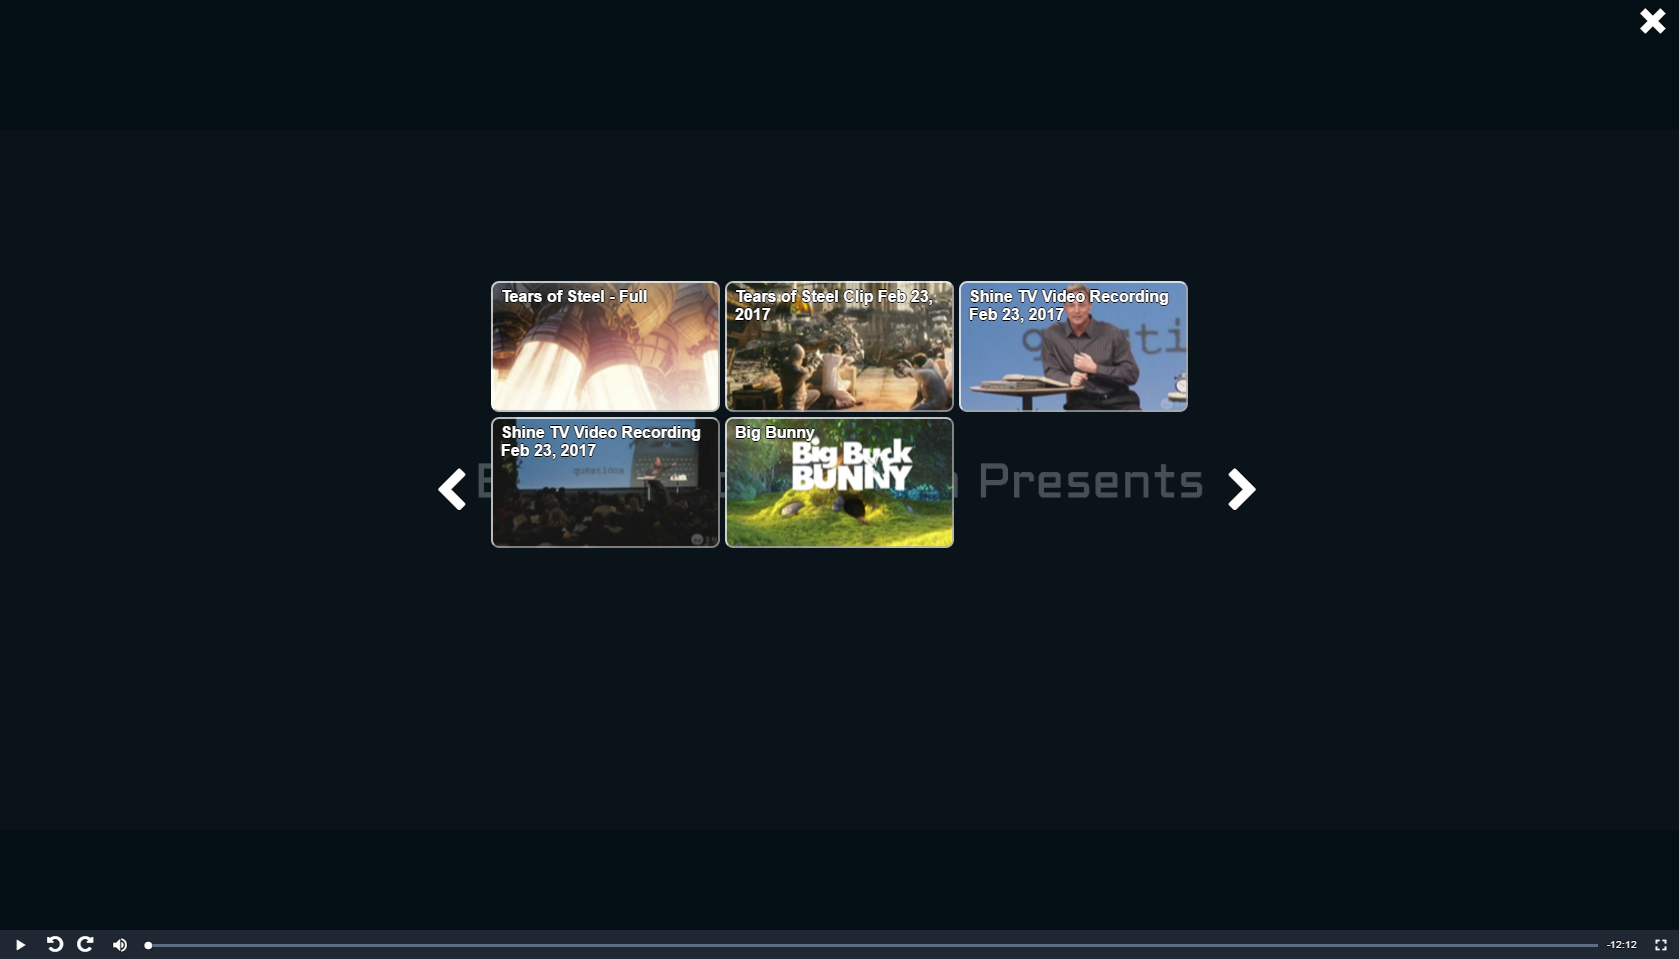 SGplayer video grid layout